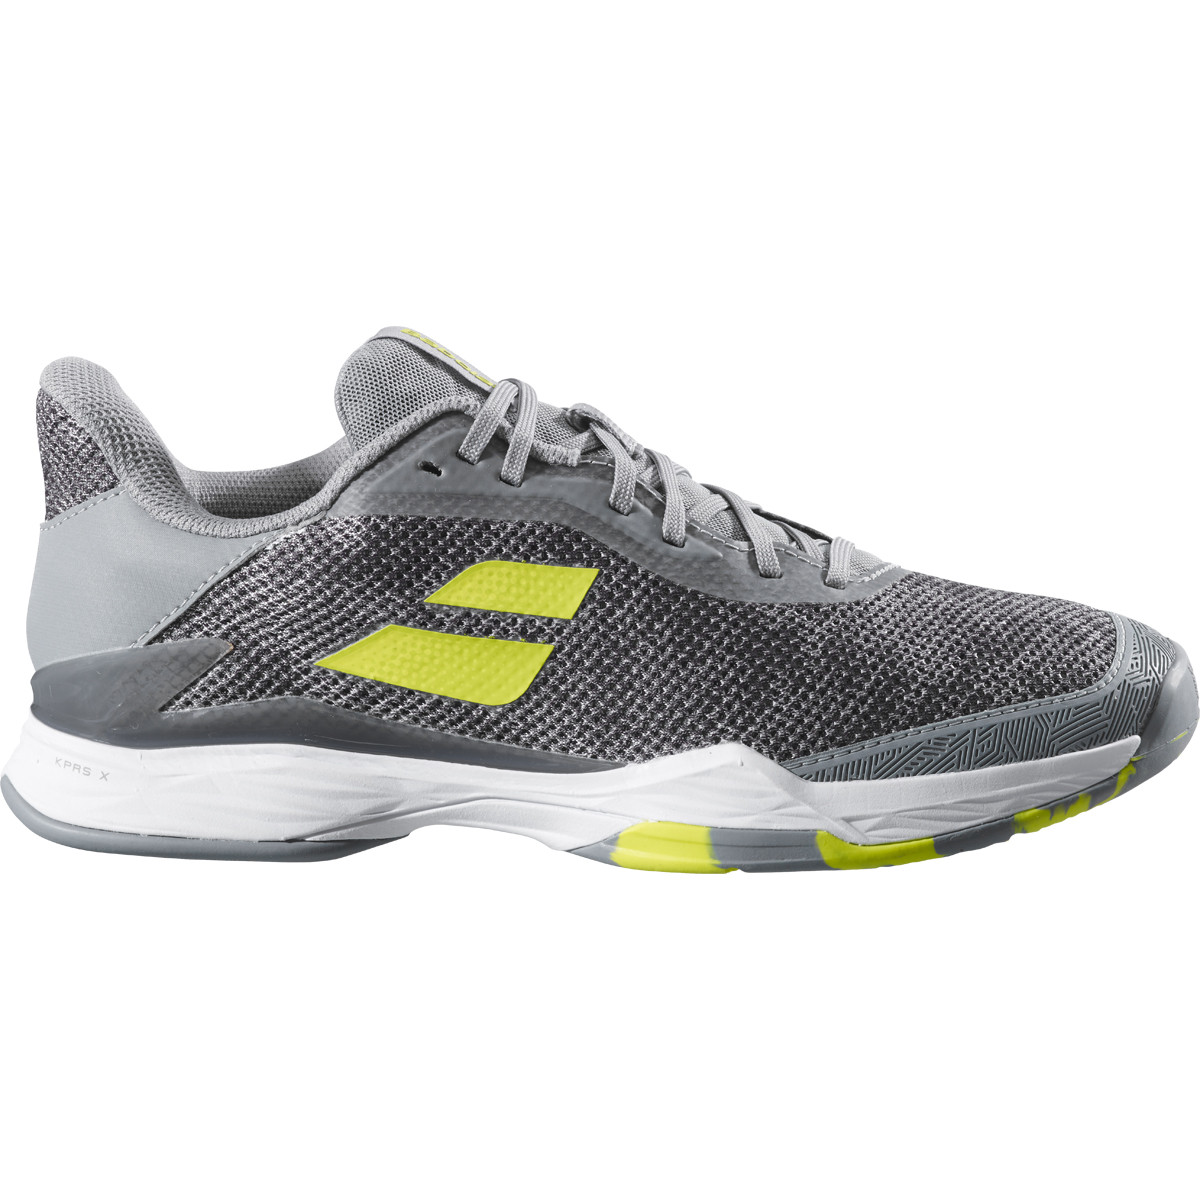 CHAUSSURES BABOLAT JET TERE TERRE BATTUE